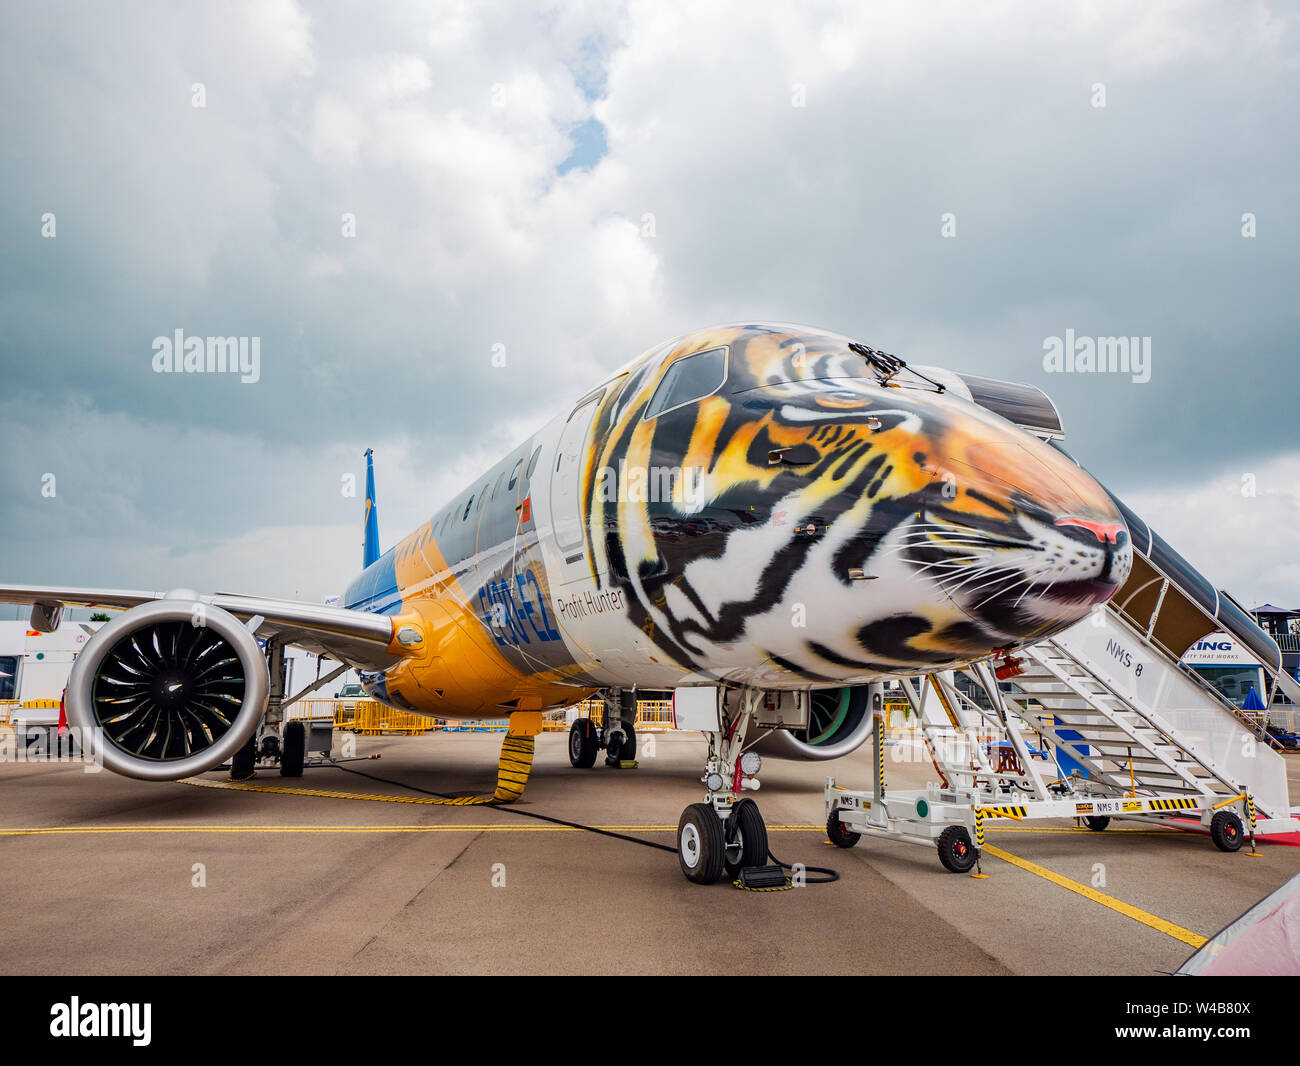 Singapore - February 4, 2018: Embraer E190-E2, with the front section decorated as a tiger head, on display during Singapore Airshow at Changi Exhibit Stock Photo